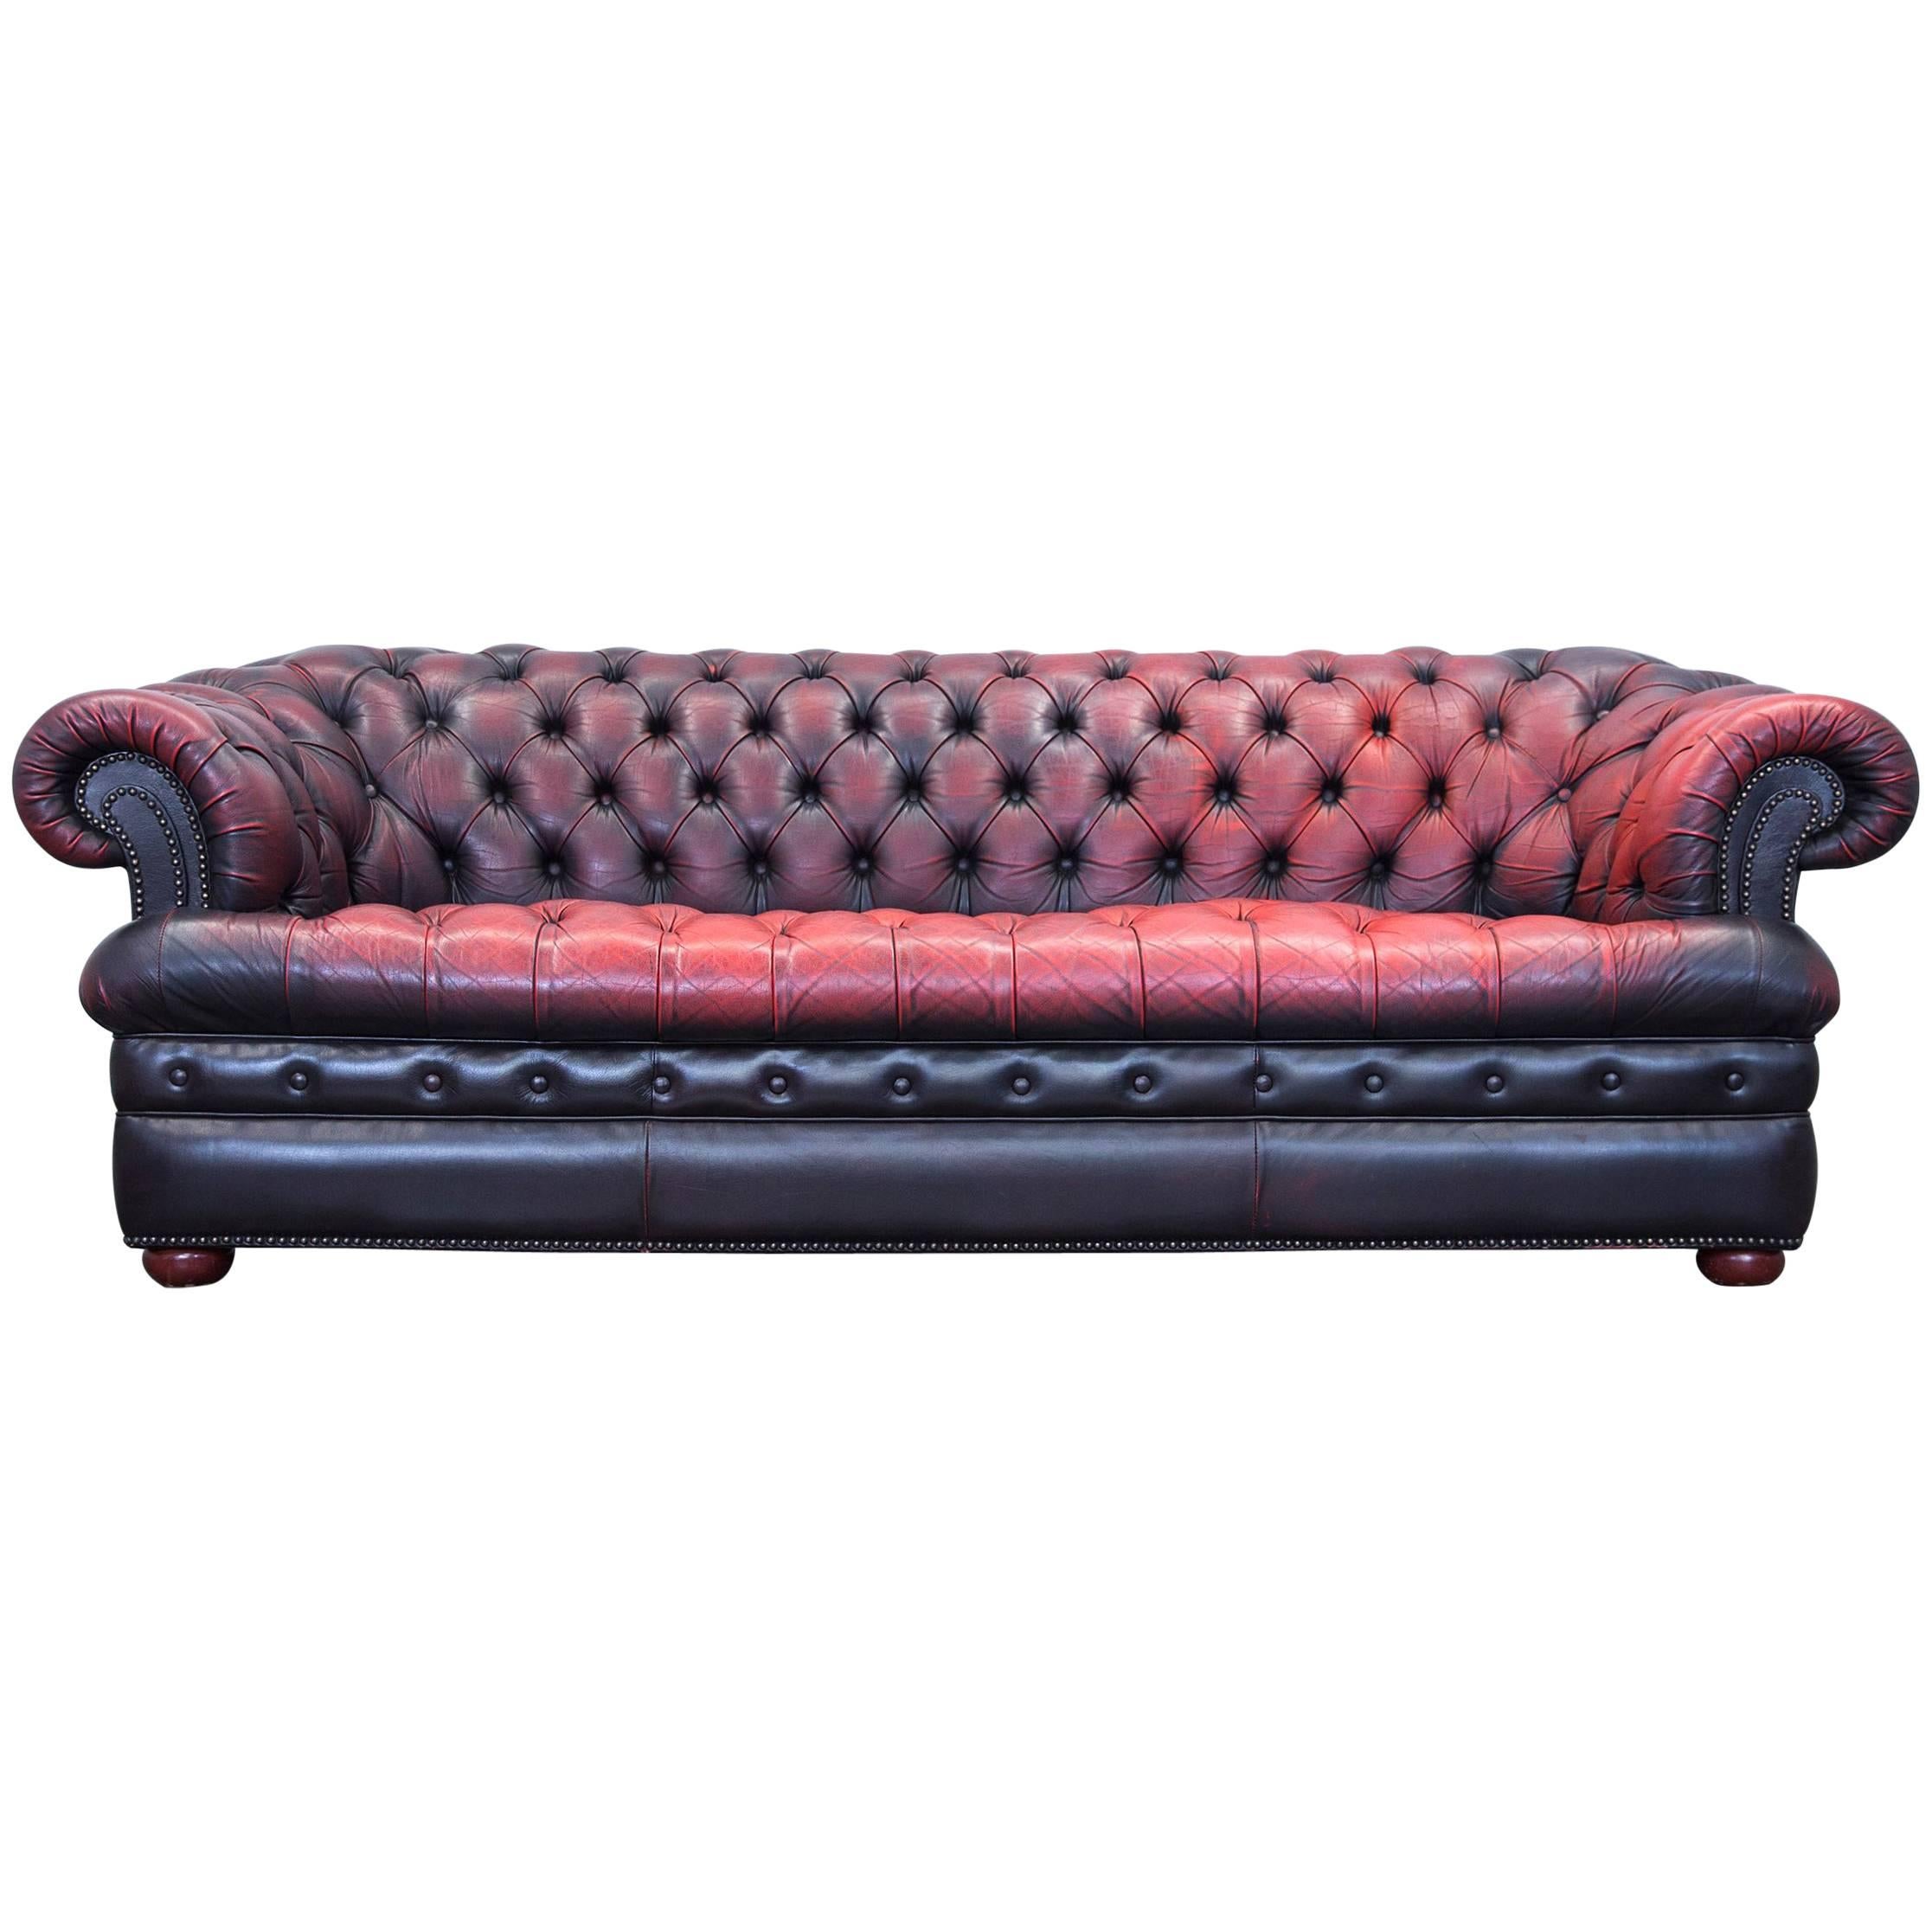 Chesterfield Sofa Leather Red Brown Three-Seat Couch Retro Vintage 